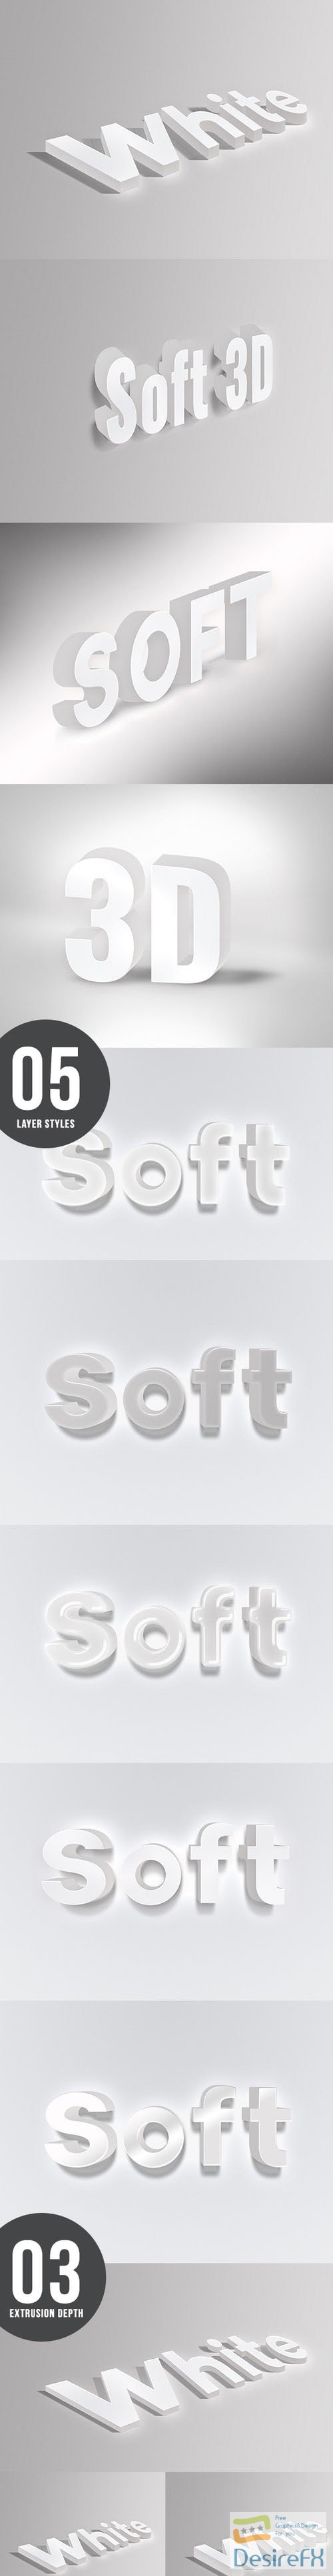 Simple White 3D Text Effects